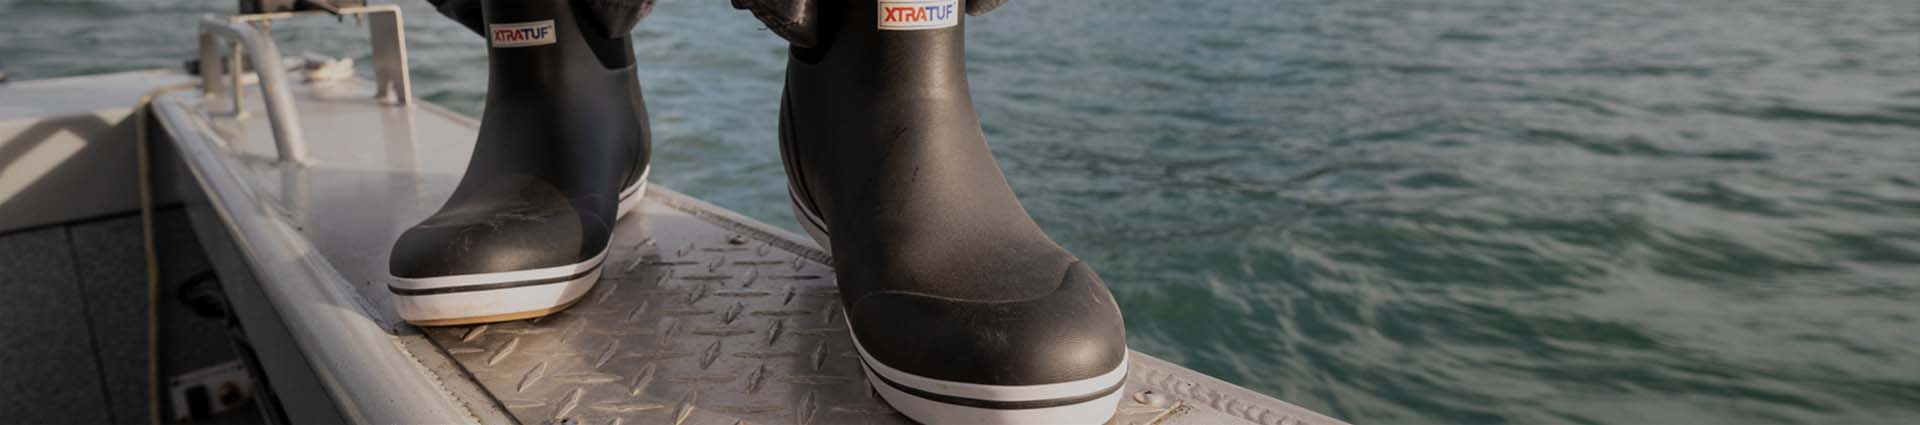 Xtratuf ankle deck boot wide width collection